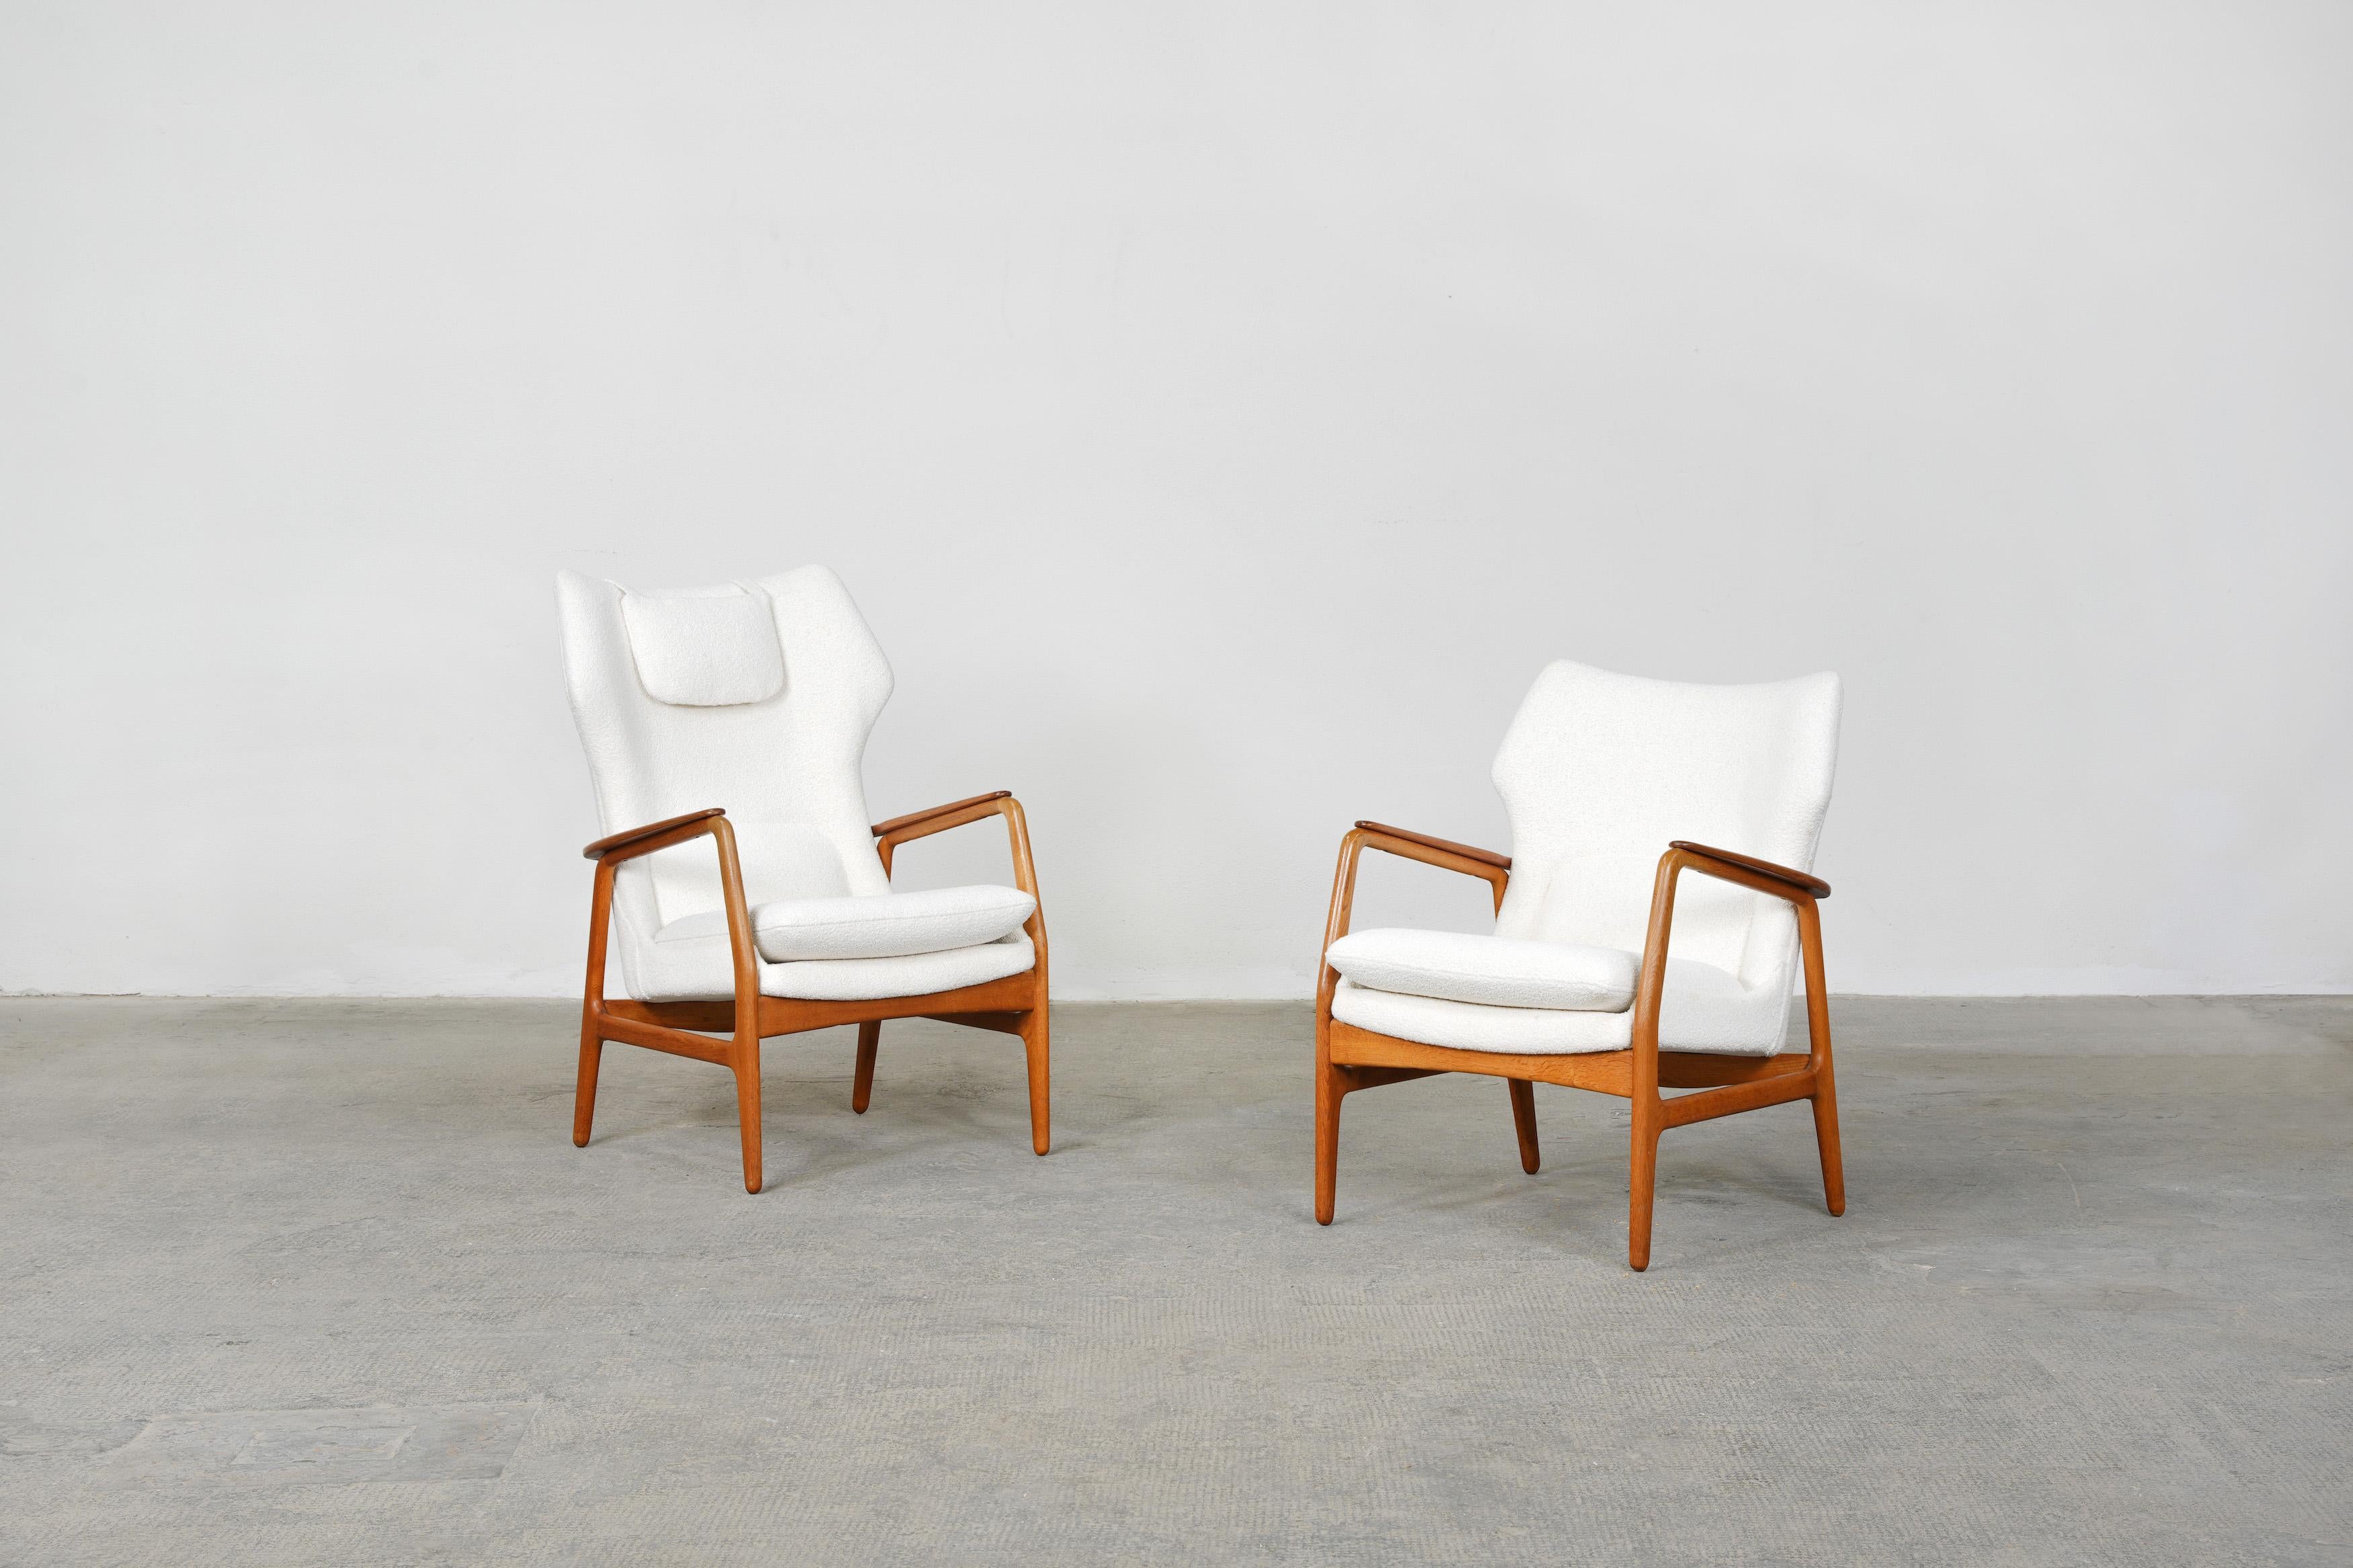 Beautiful pair of lounge chairs designed by the Danish Designers Ib Madsen & Acton Schubell for Bovenkamp, 1954.

The pair is in excellent condition. They were newly reupholstered with a high-quality off-white boucle fabric.
Both chairs come with